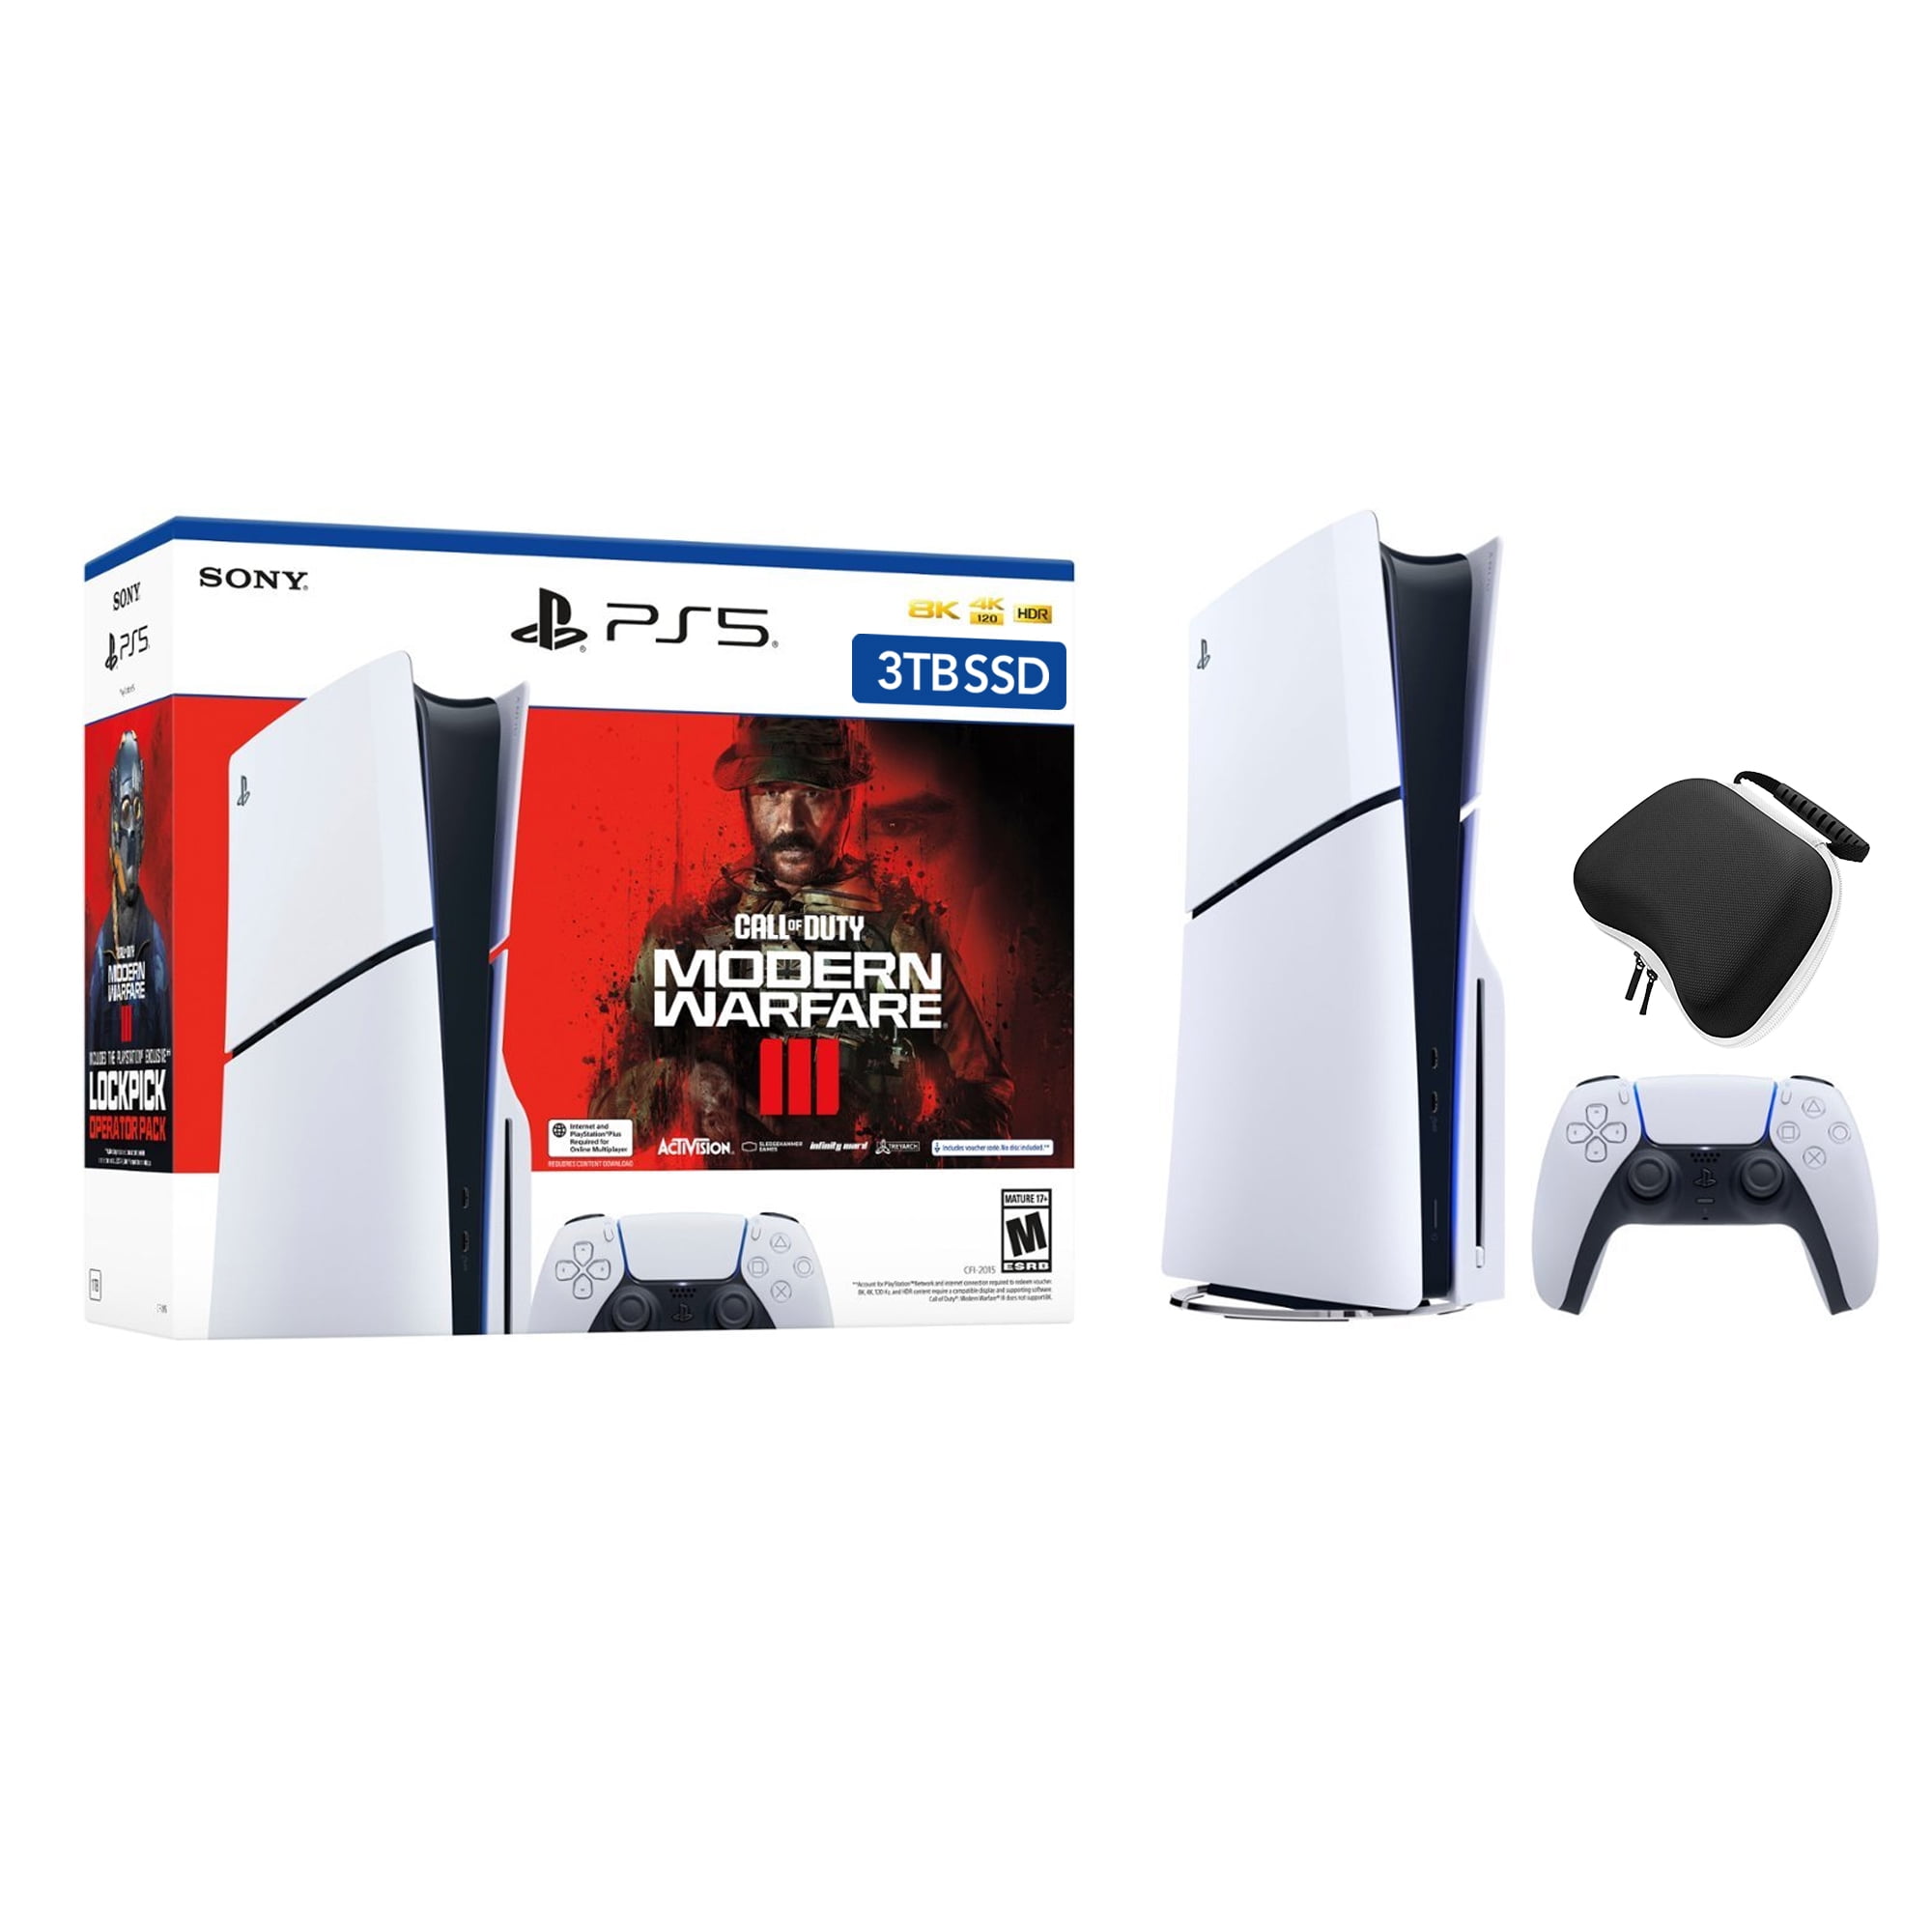  2023 New PlayStation 5 Slim Upgraded 3TB Disc Edition Call of  Duty Modern Warfare III Bundle and Controller Charger - White, Slim PS5 3TB  PCIe SSD Gaming Console [video game] [video